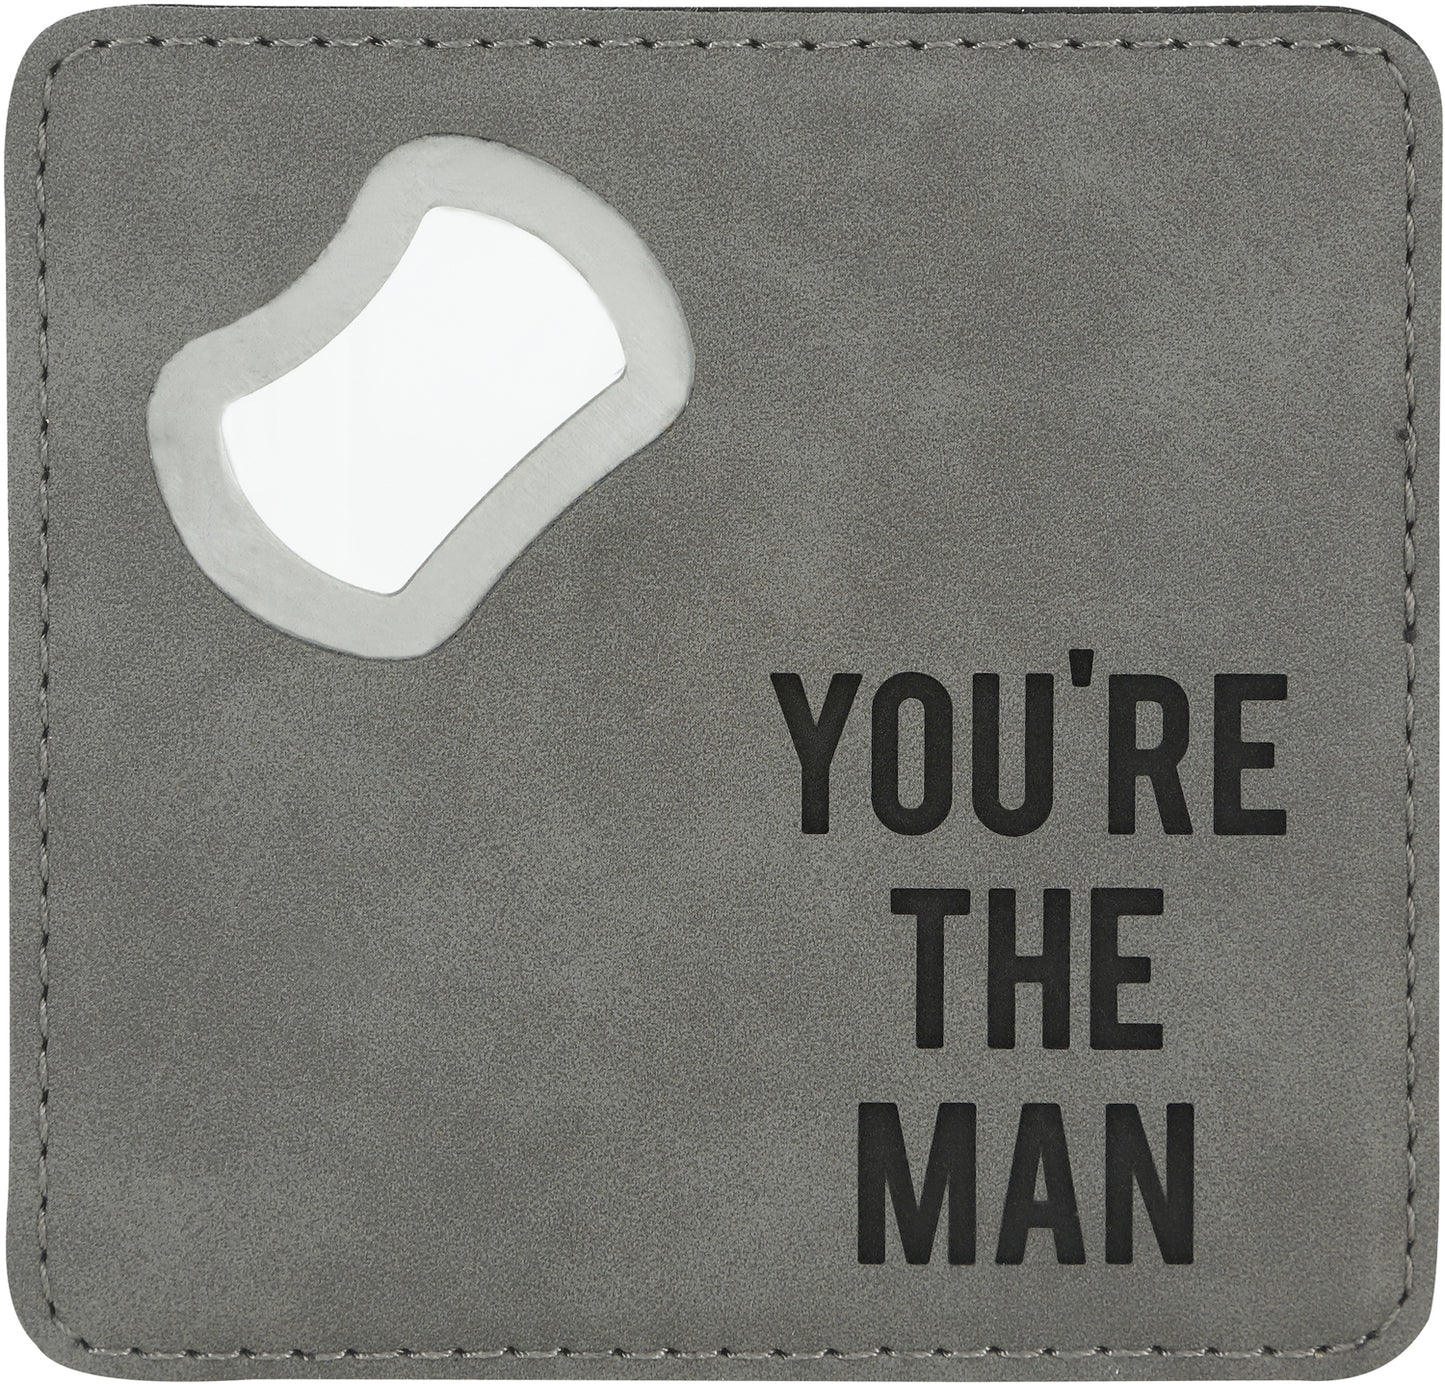 You're The Man - 4" x 4" Bottle Opener Coaster